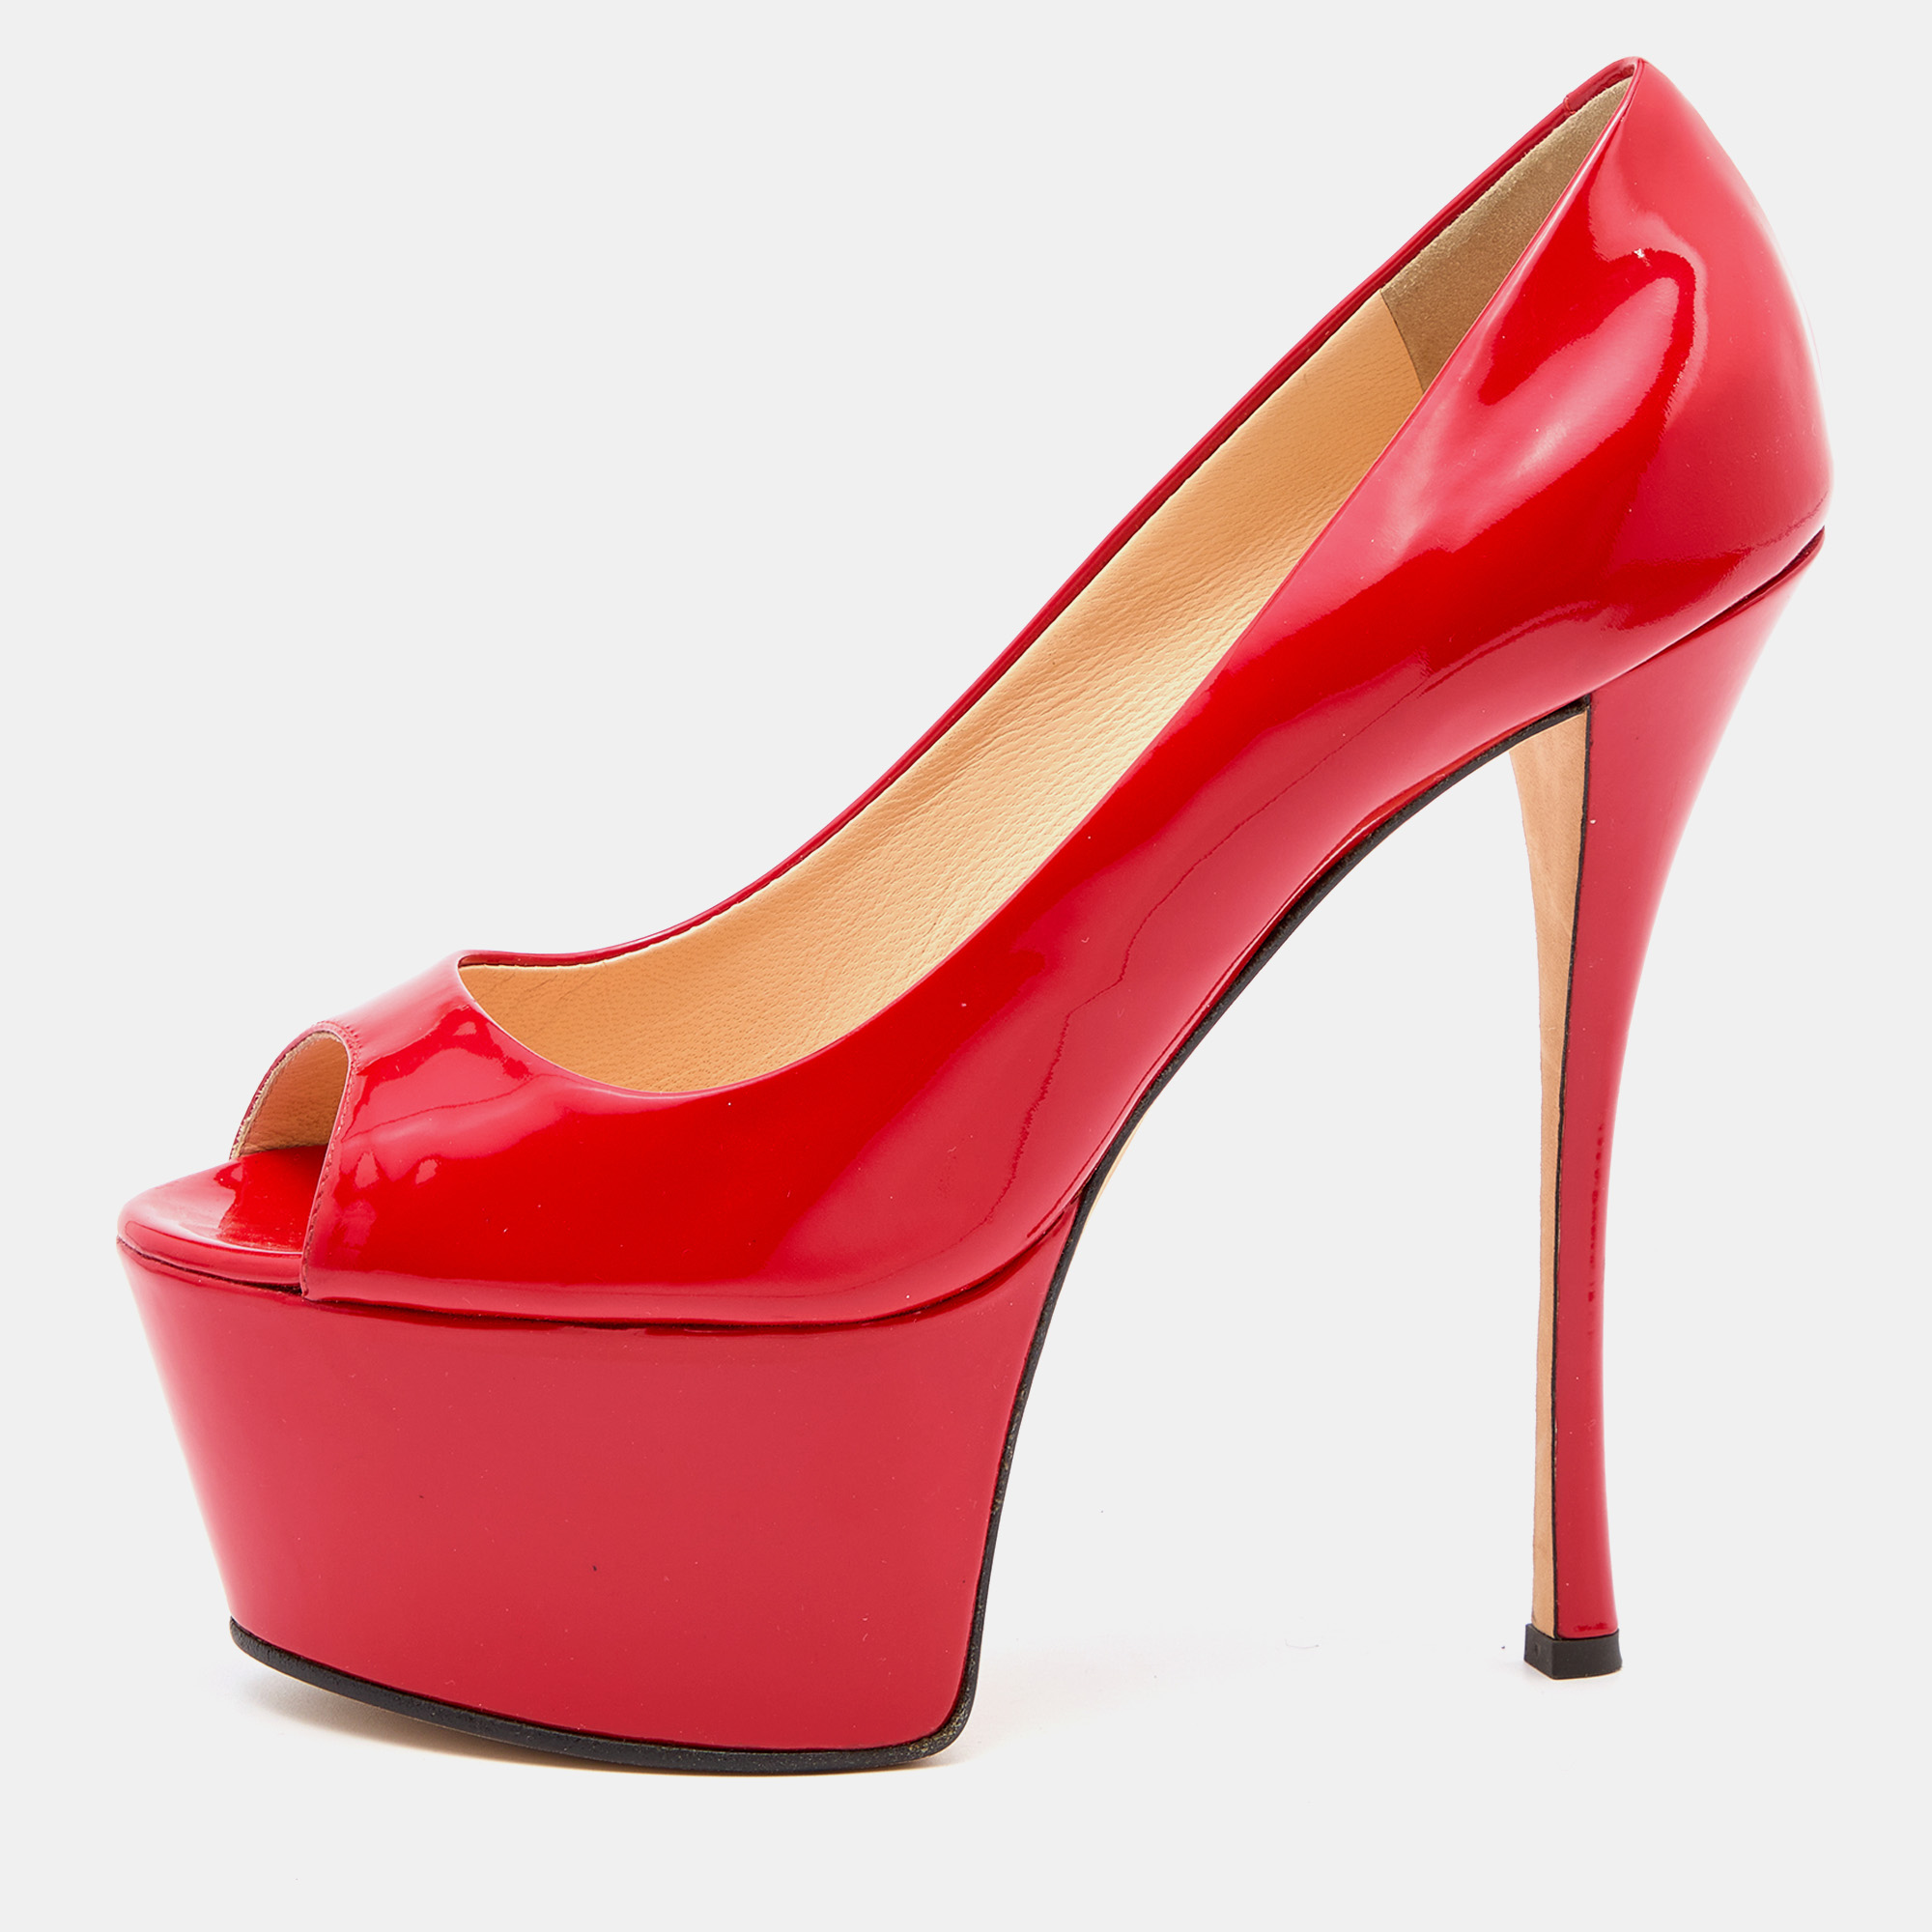 Pre-owned Giuseppe Zanotti Red Patent Leather Open Toe Platform Pumps Size 40